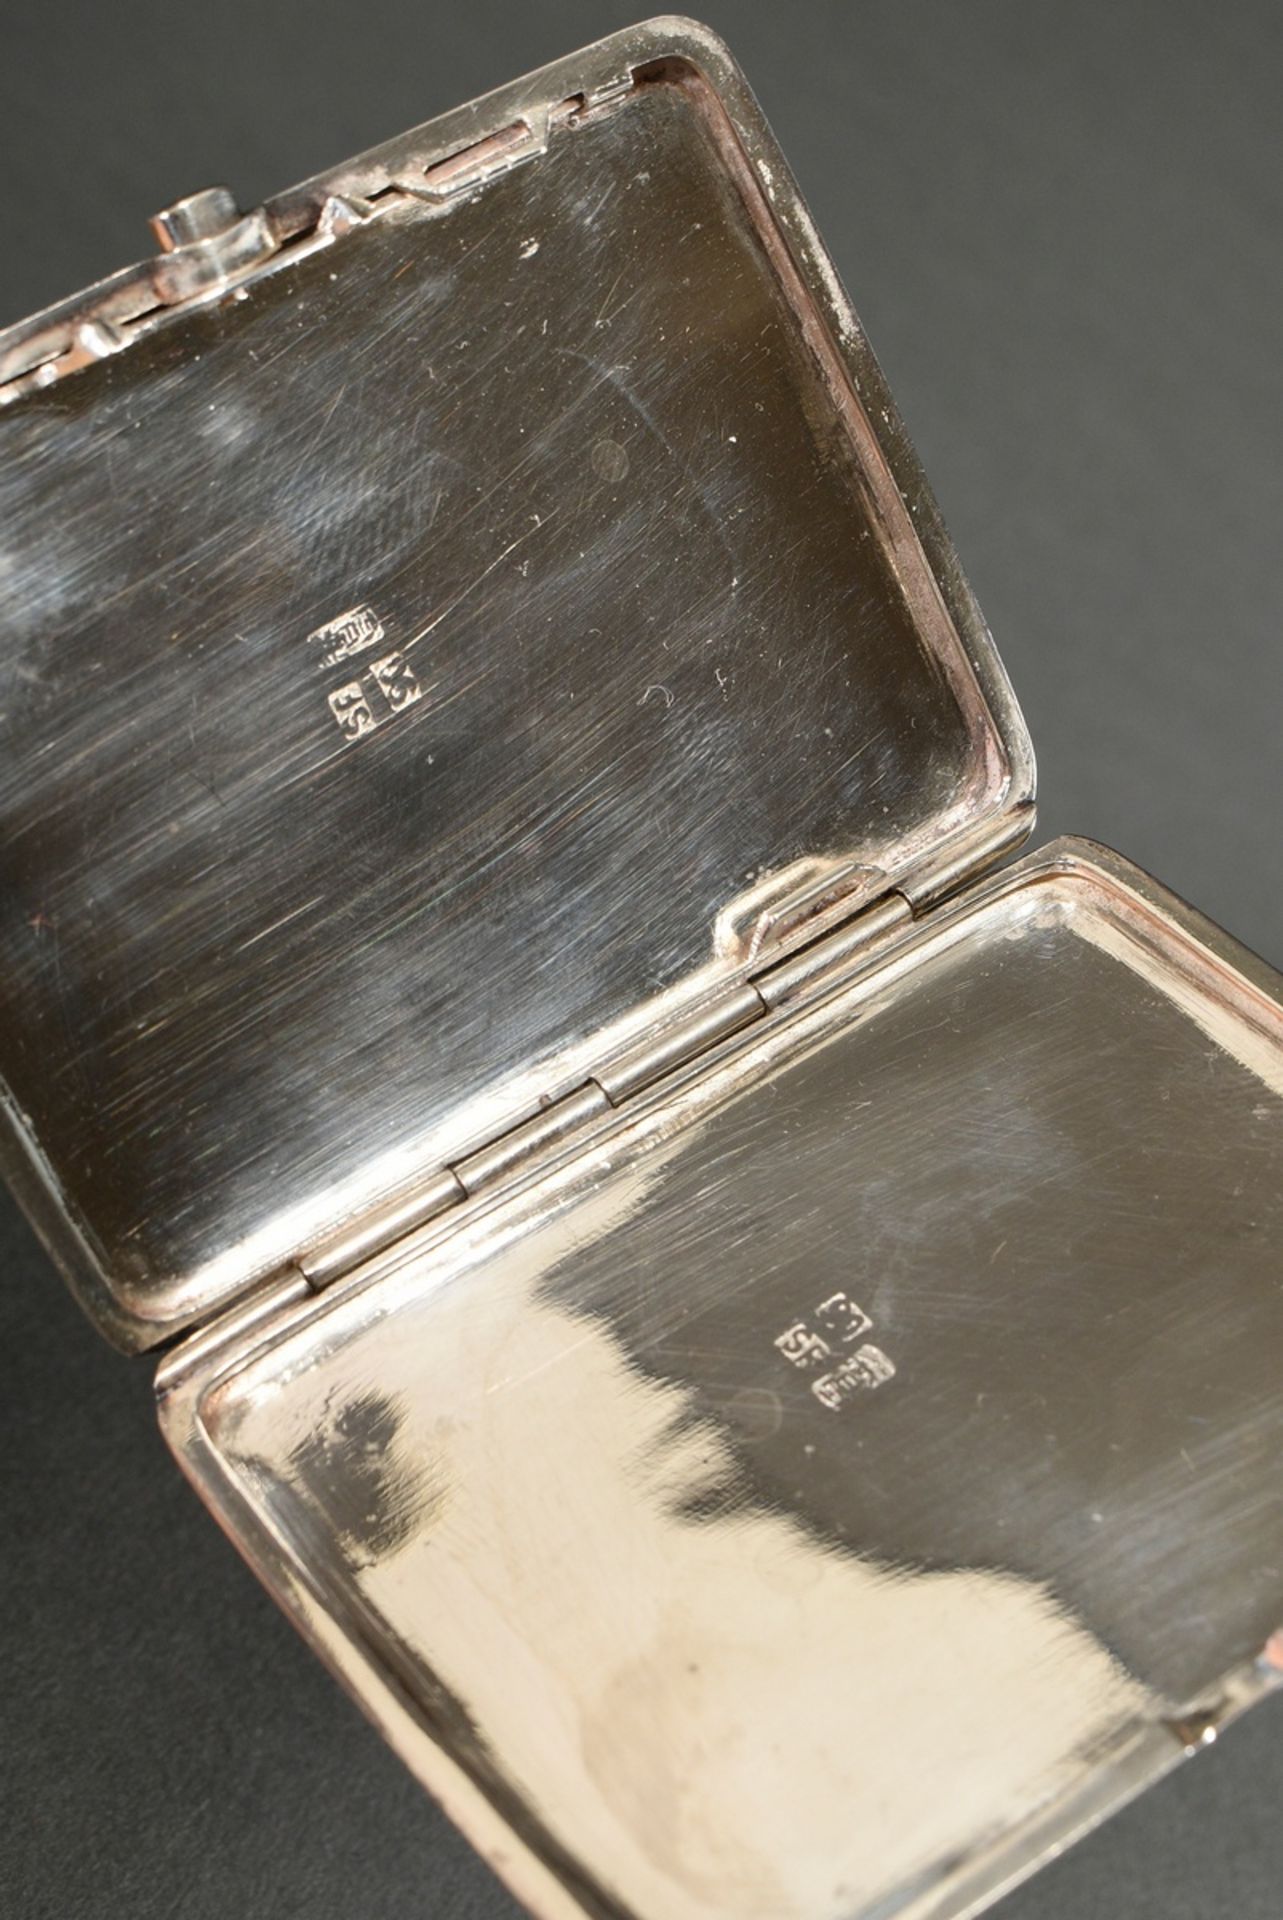 2 Various pieces of Chinese silver: etui with empty engraved cartouche (8x6.3cm) and conical cup wi - Image 6 of 7